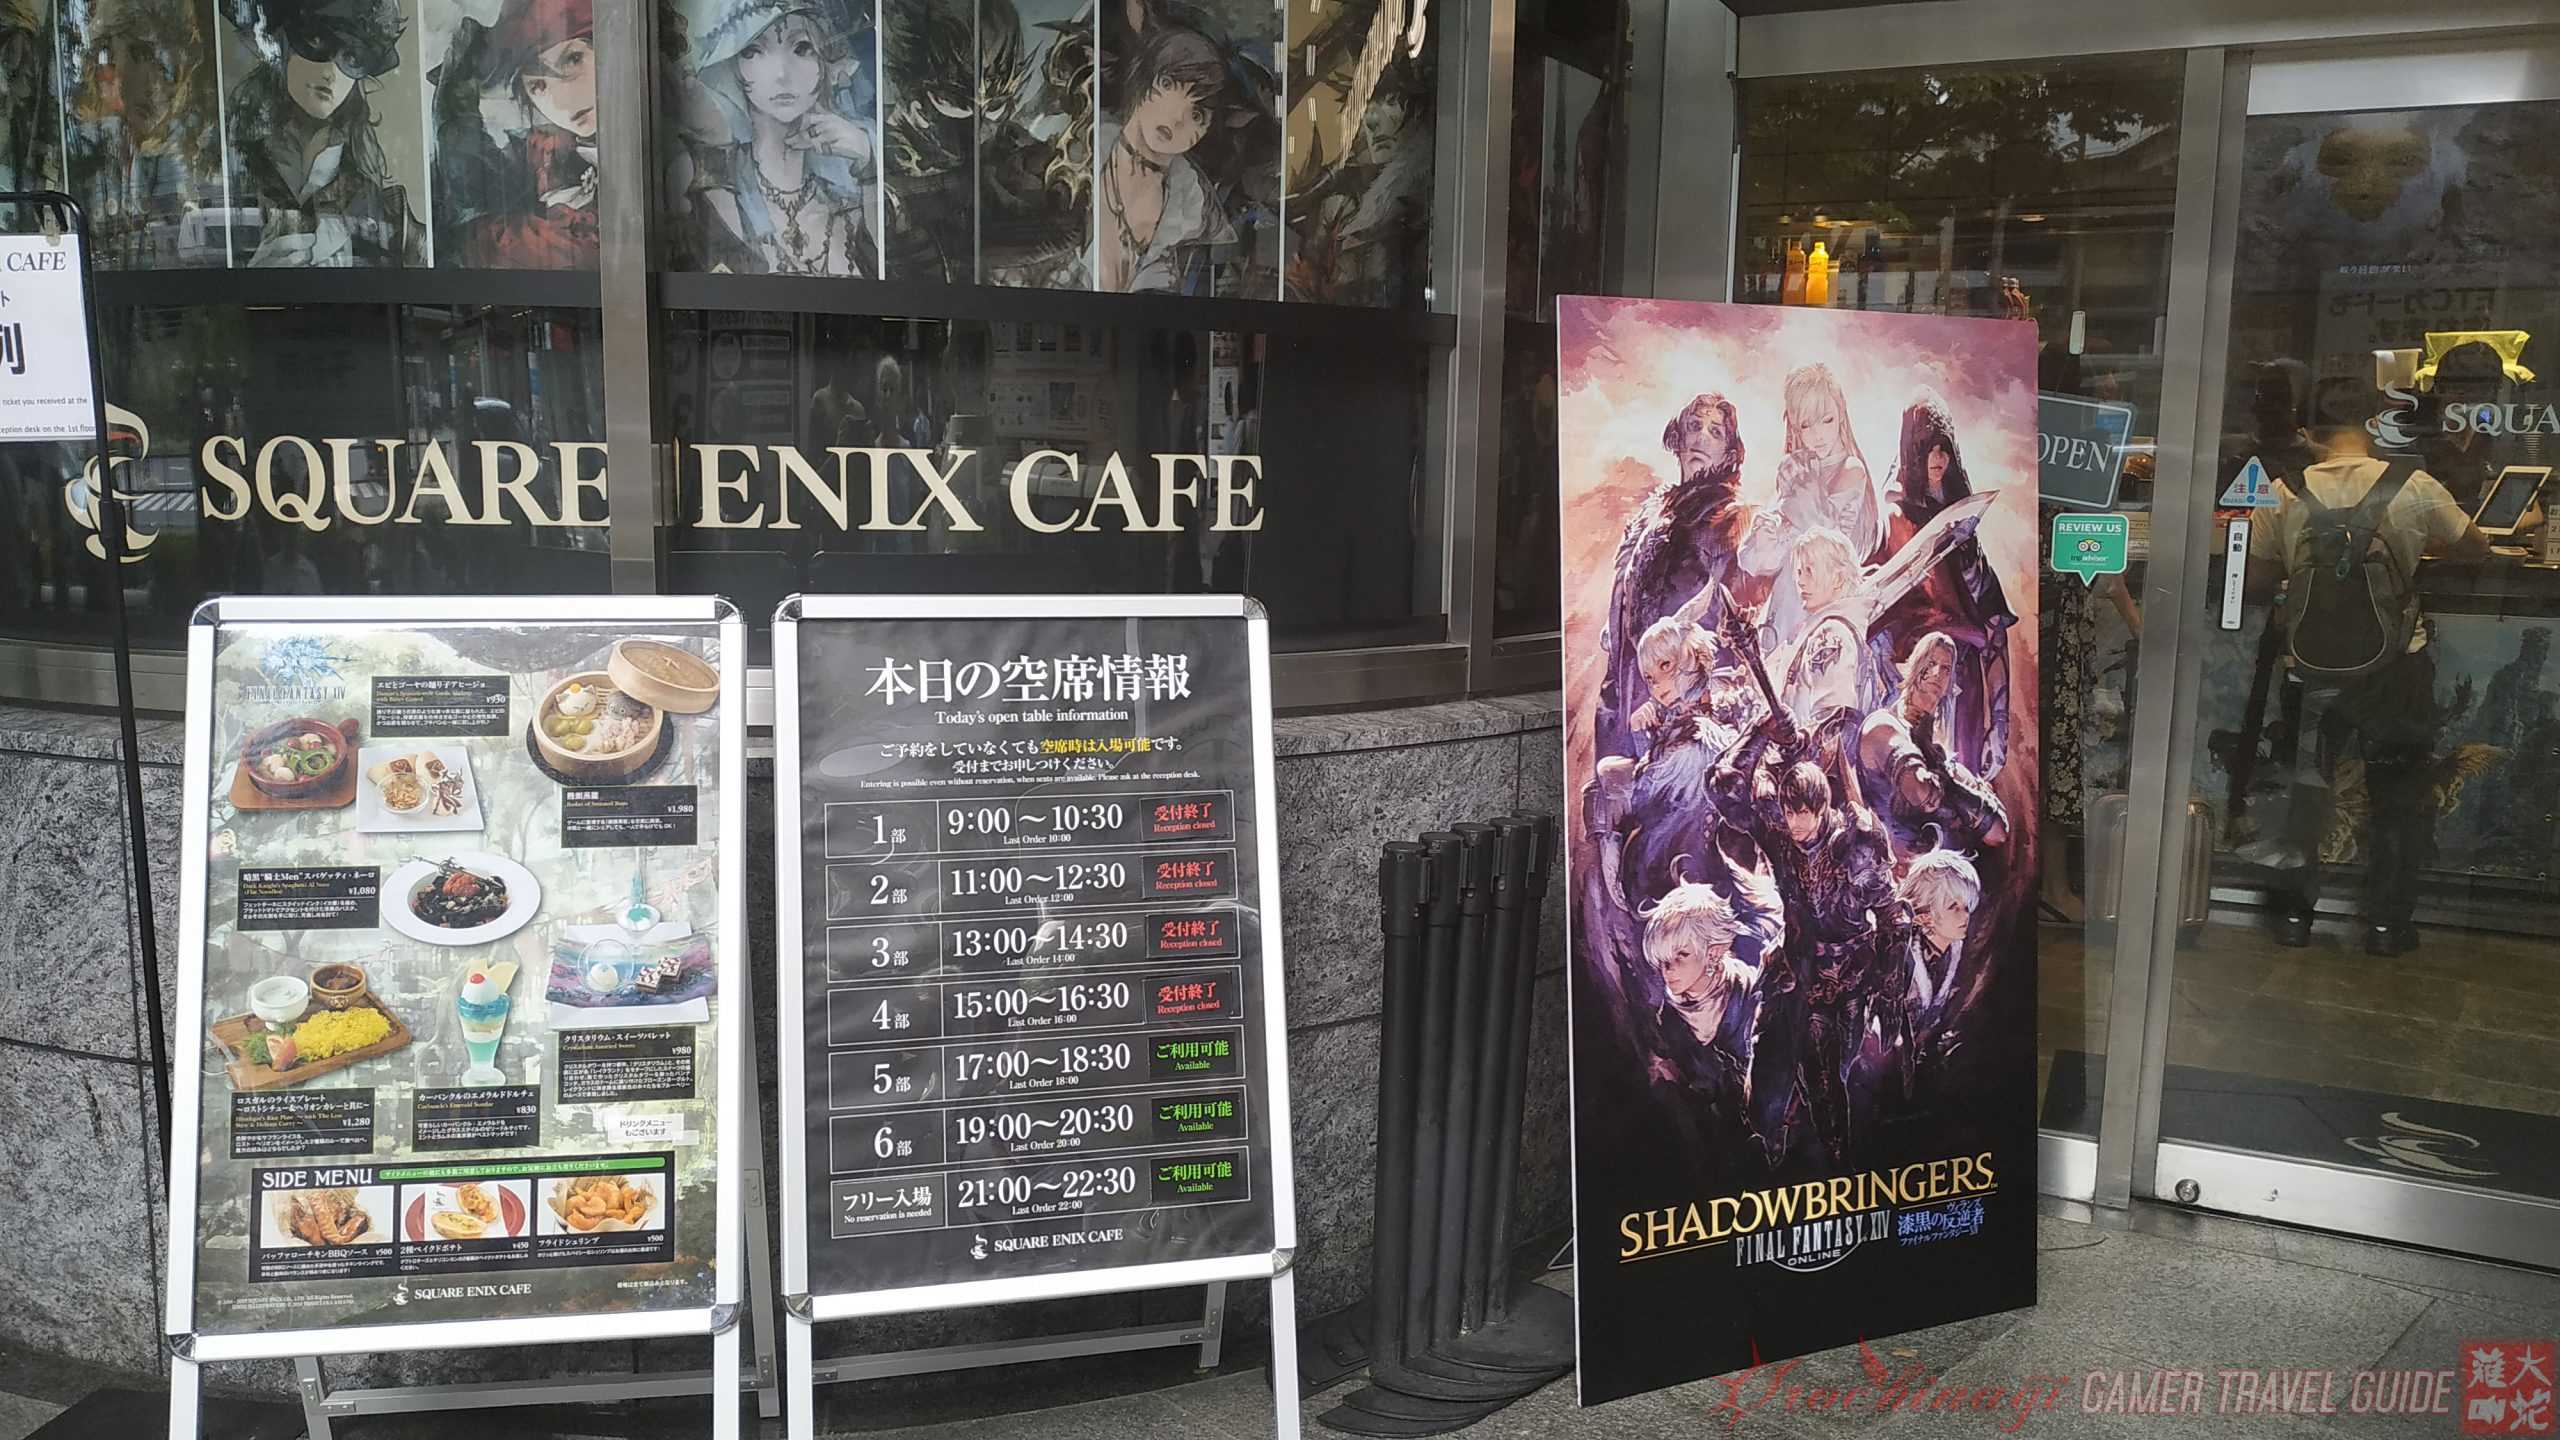 Square Enix Cafe  The Official Tokyo Travel Guide, GO TOKYO